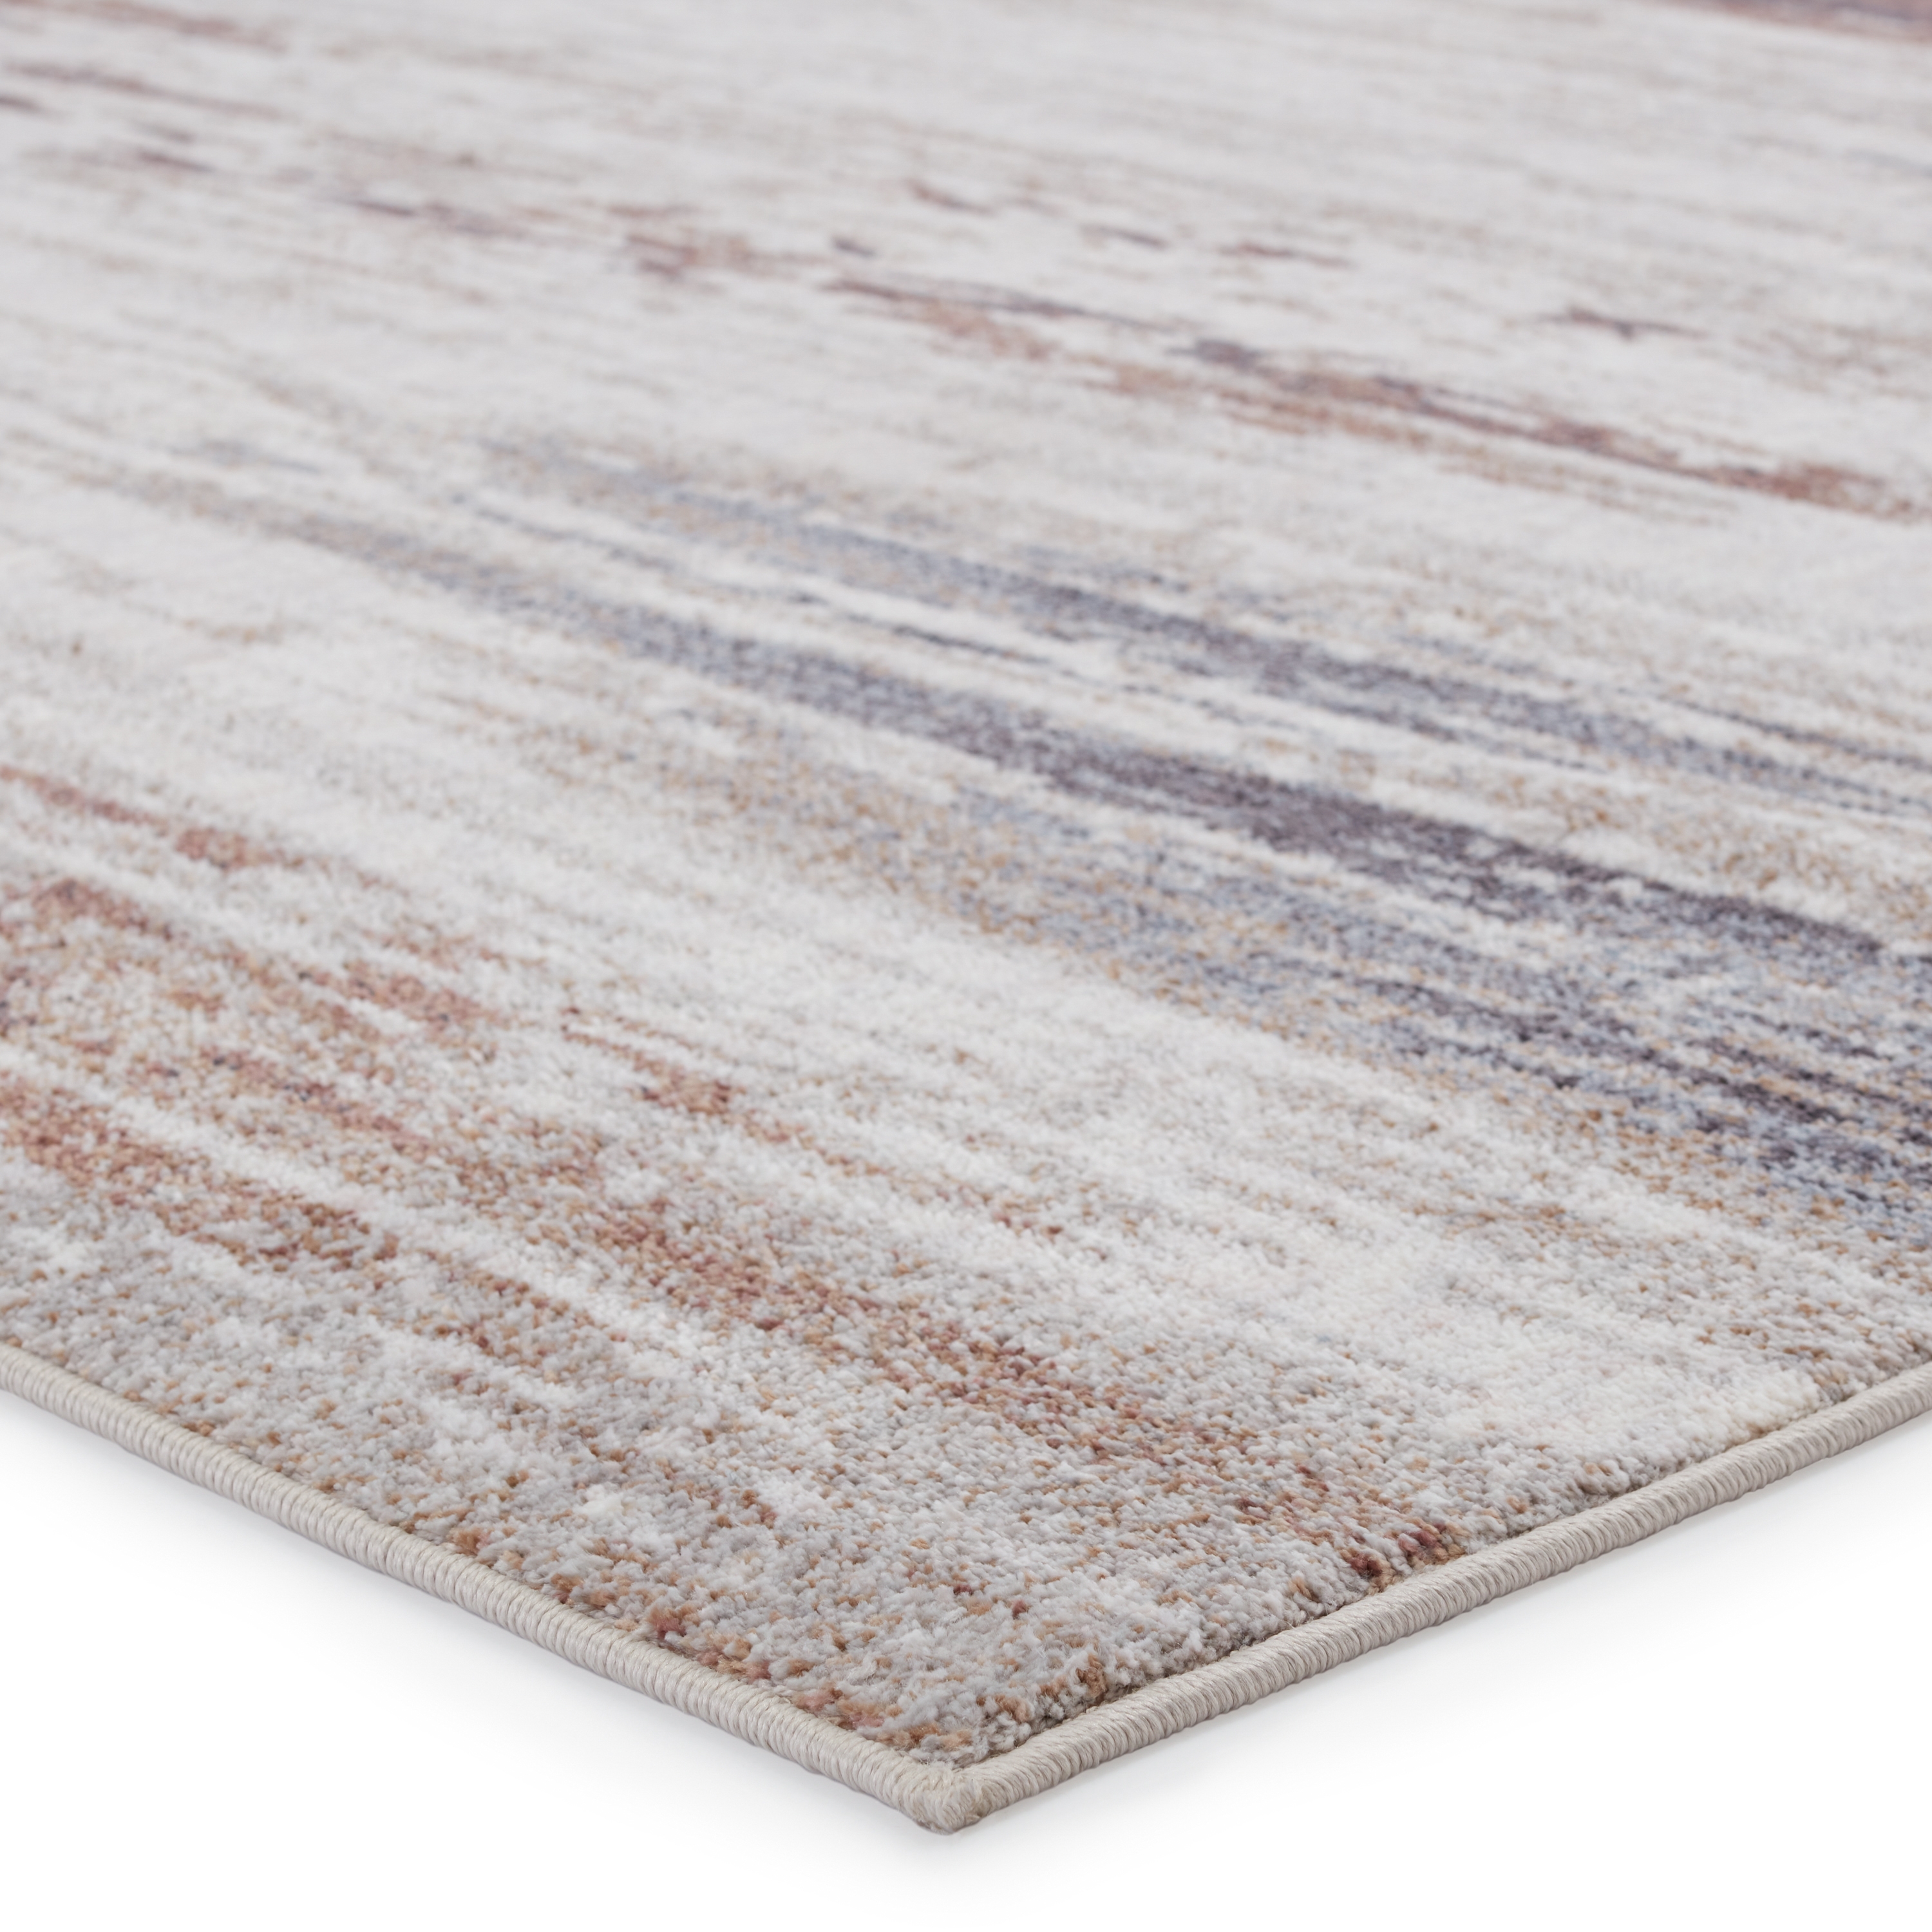 Vibe by Oberon Abstract Light Gray/ Brown Area Rug (10'X14') - Image 1